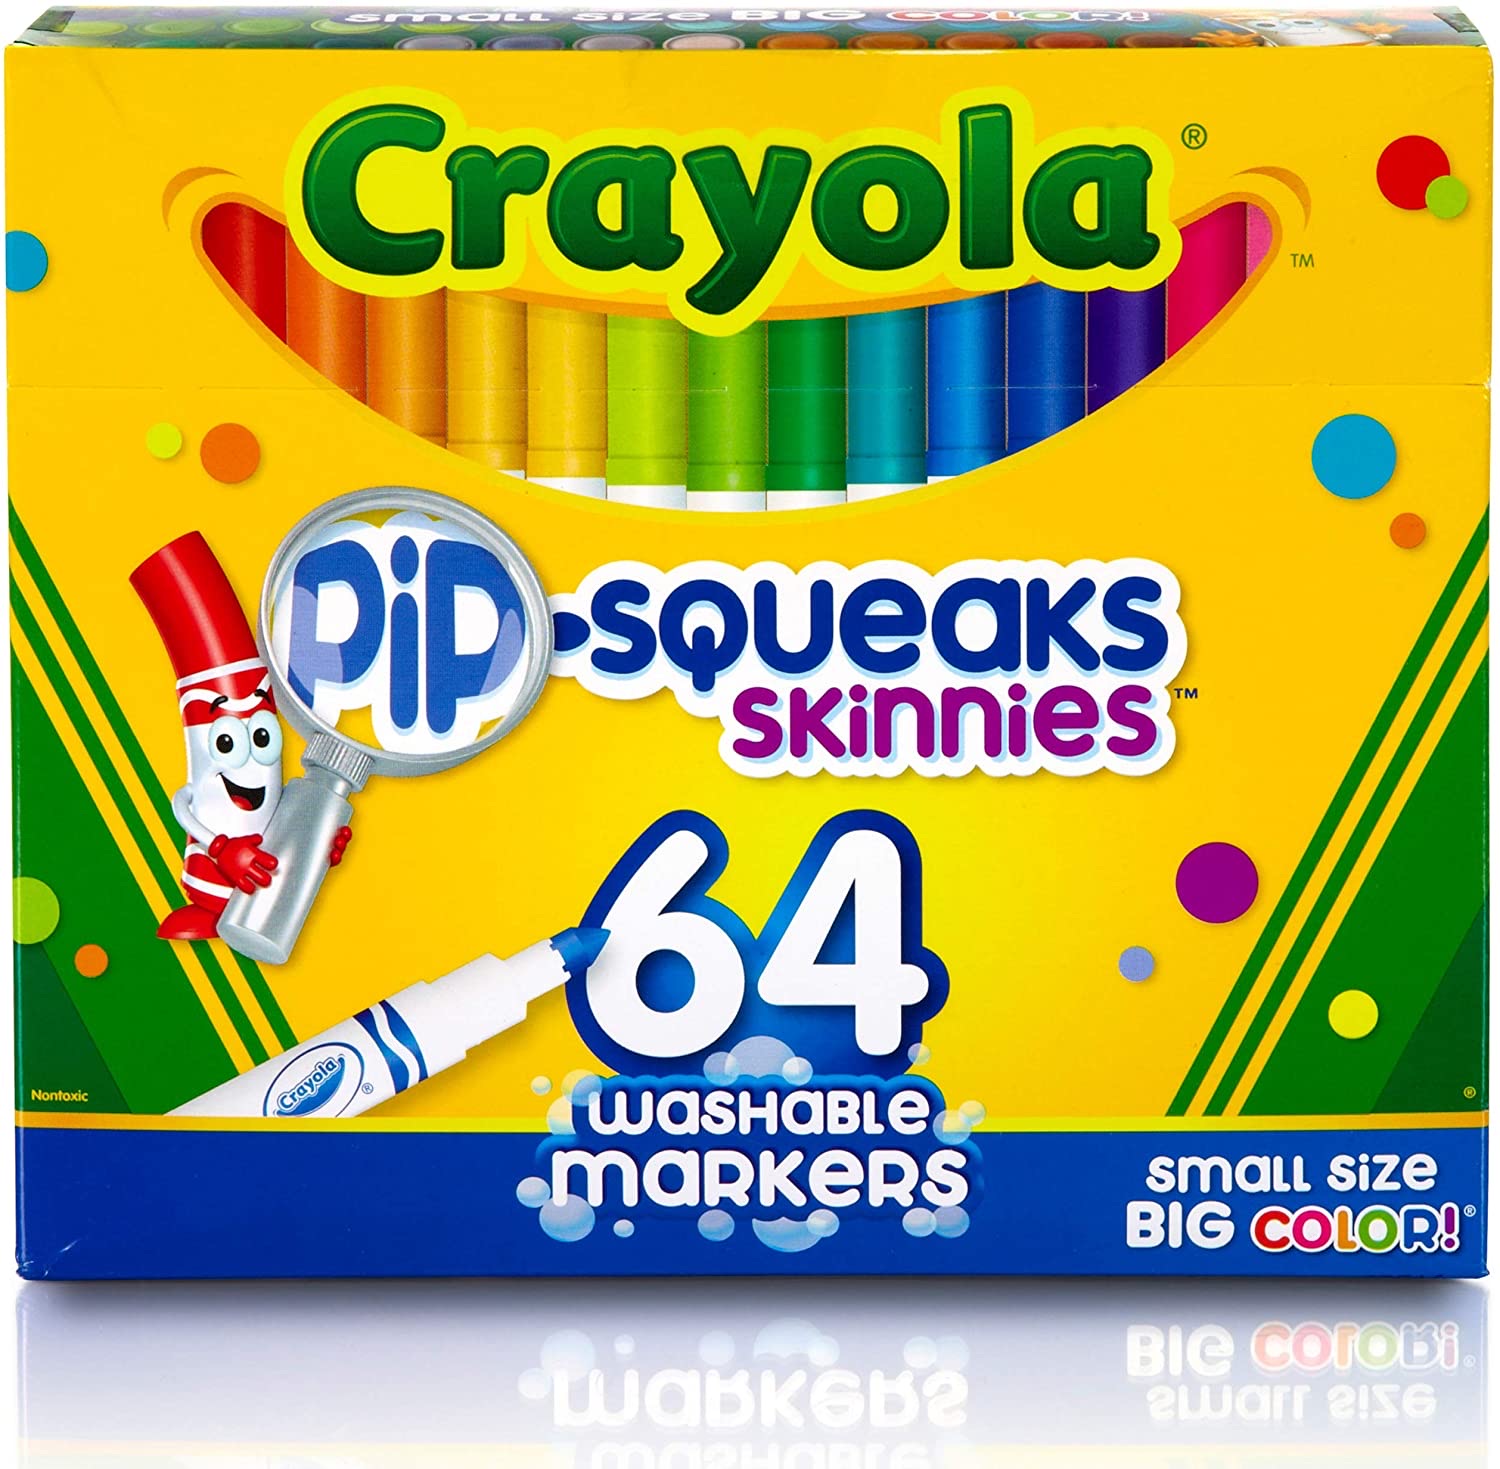 Use Crayola Pip Squeaks Skinnies Markers in Your Cricut